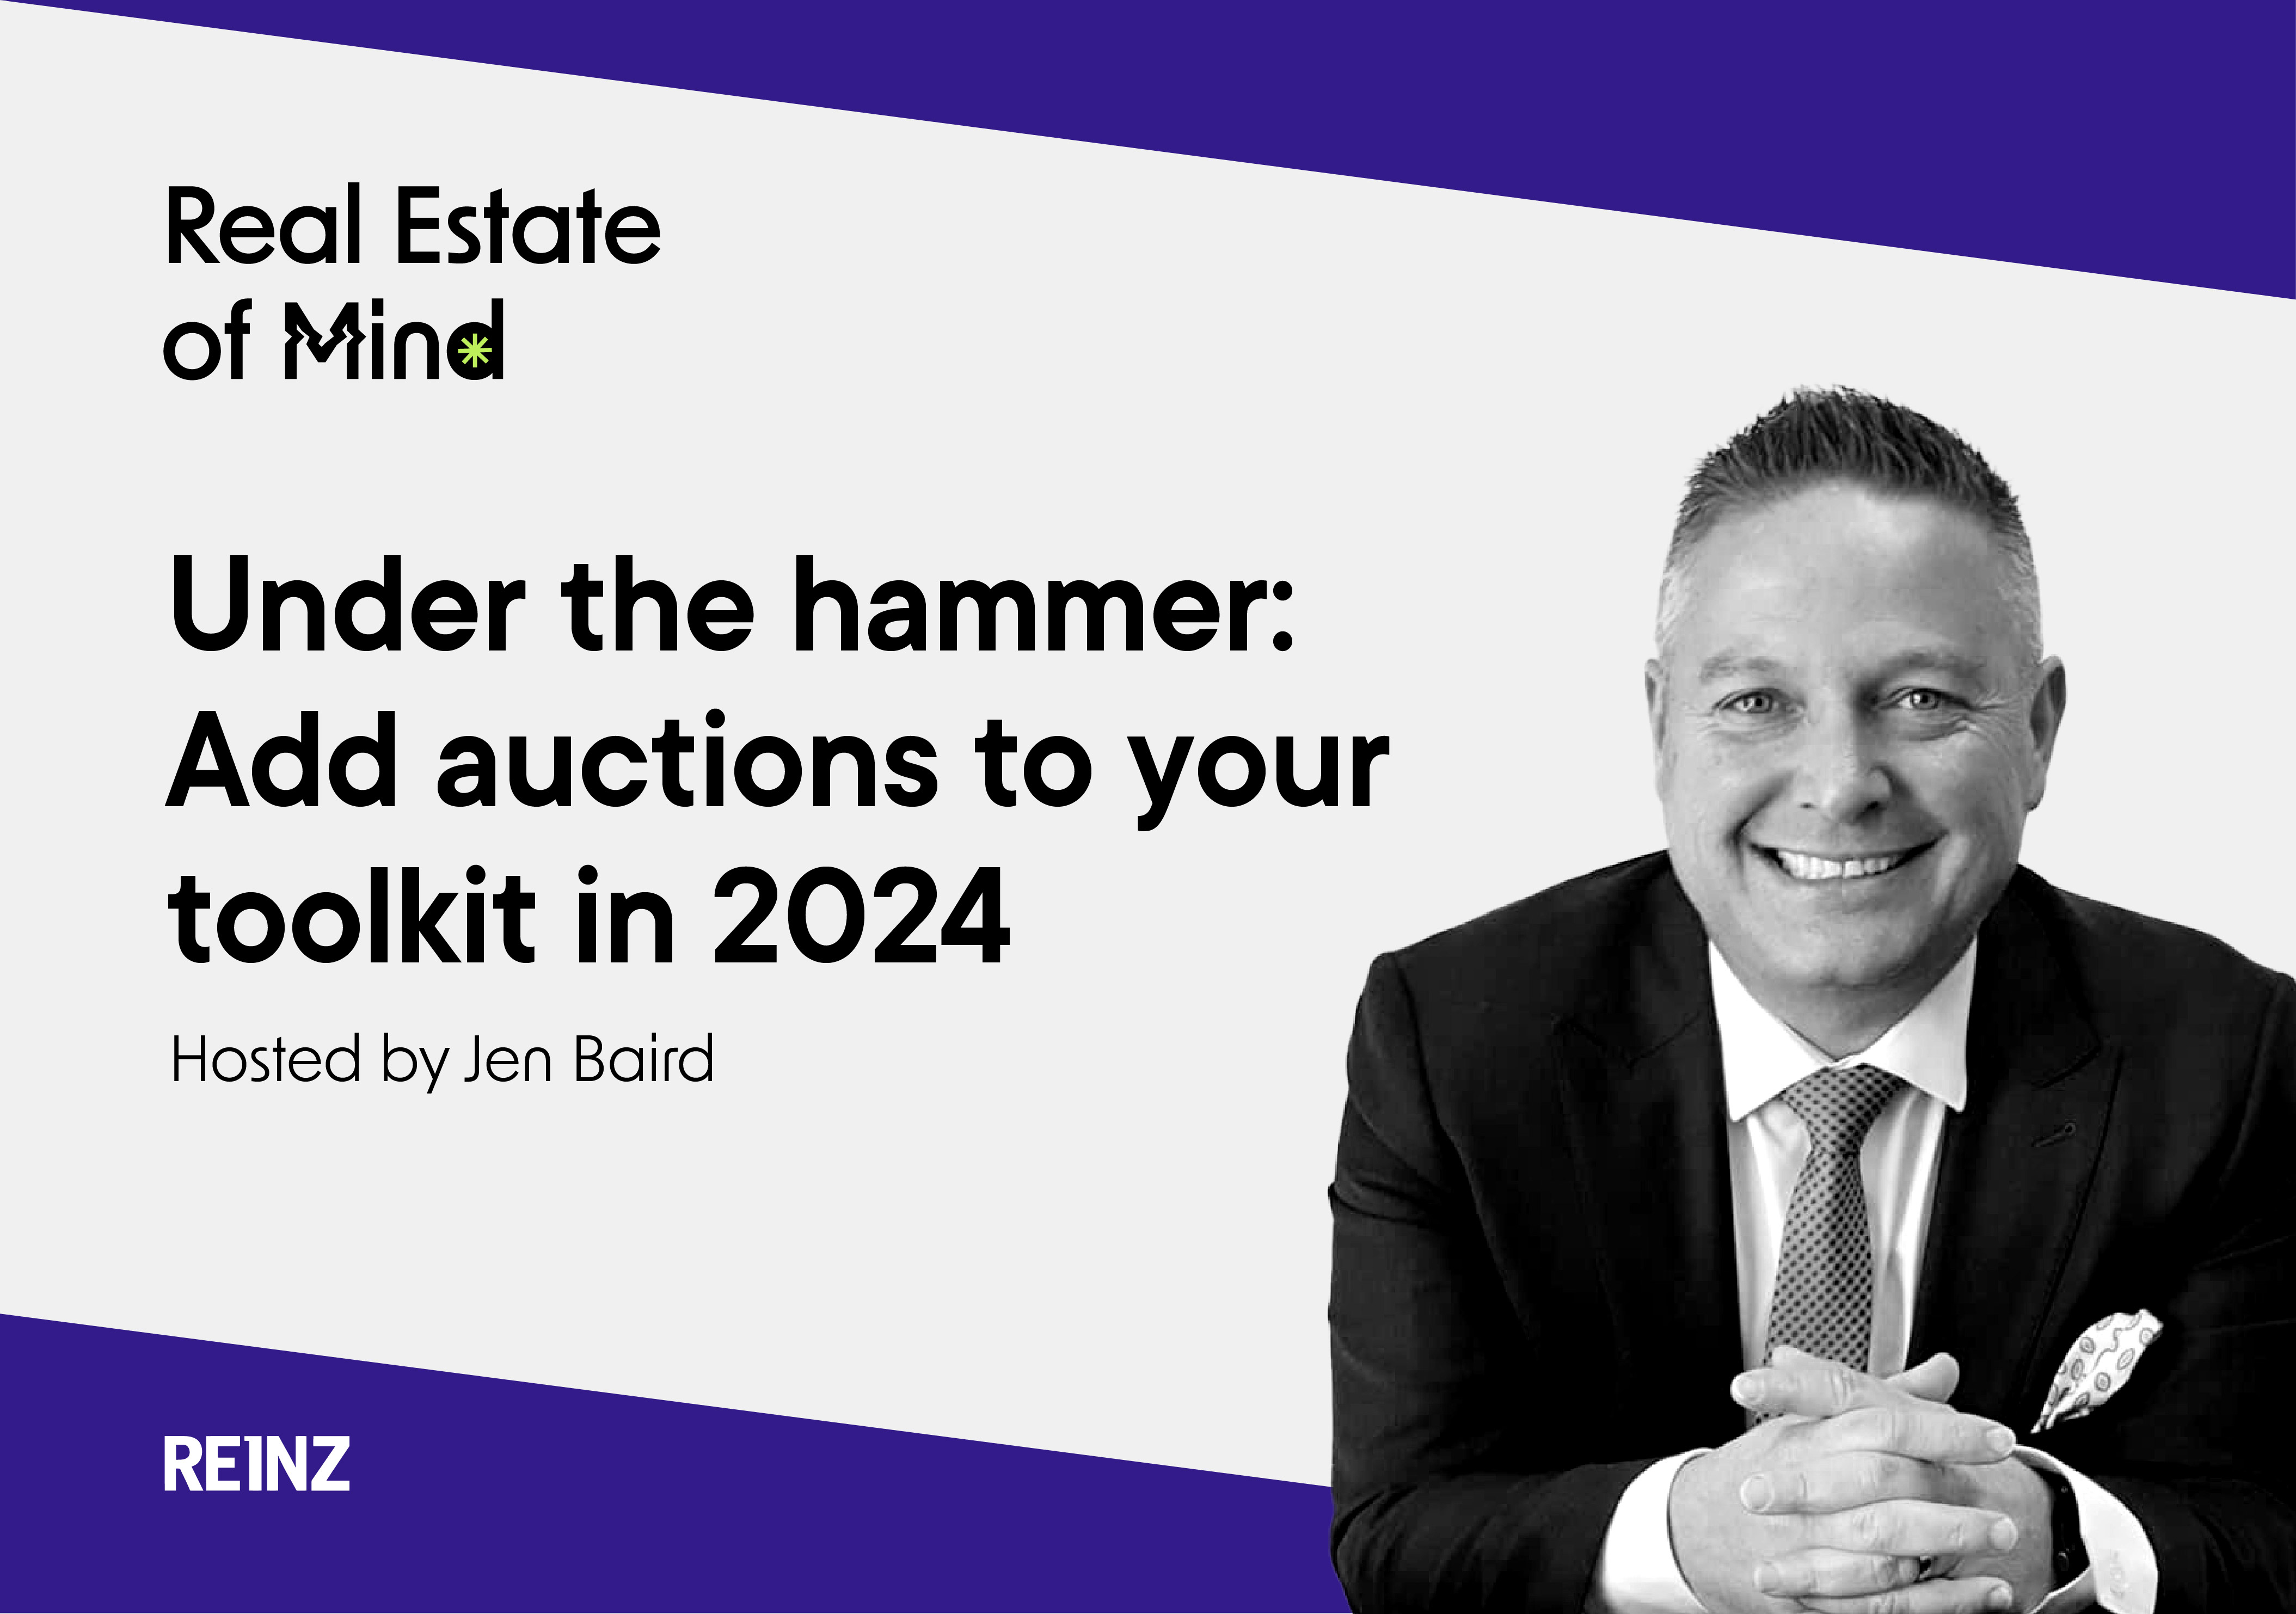 Under the hammer: Add auctions to your toolkit in 2024